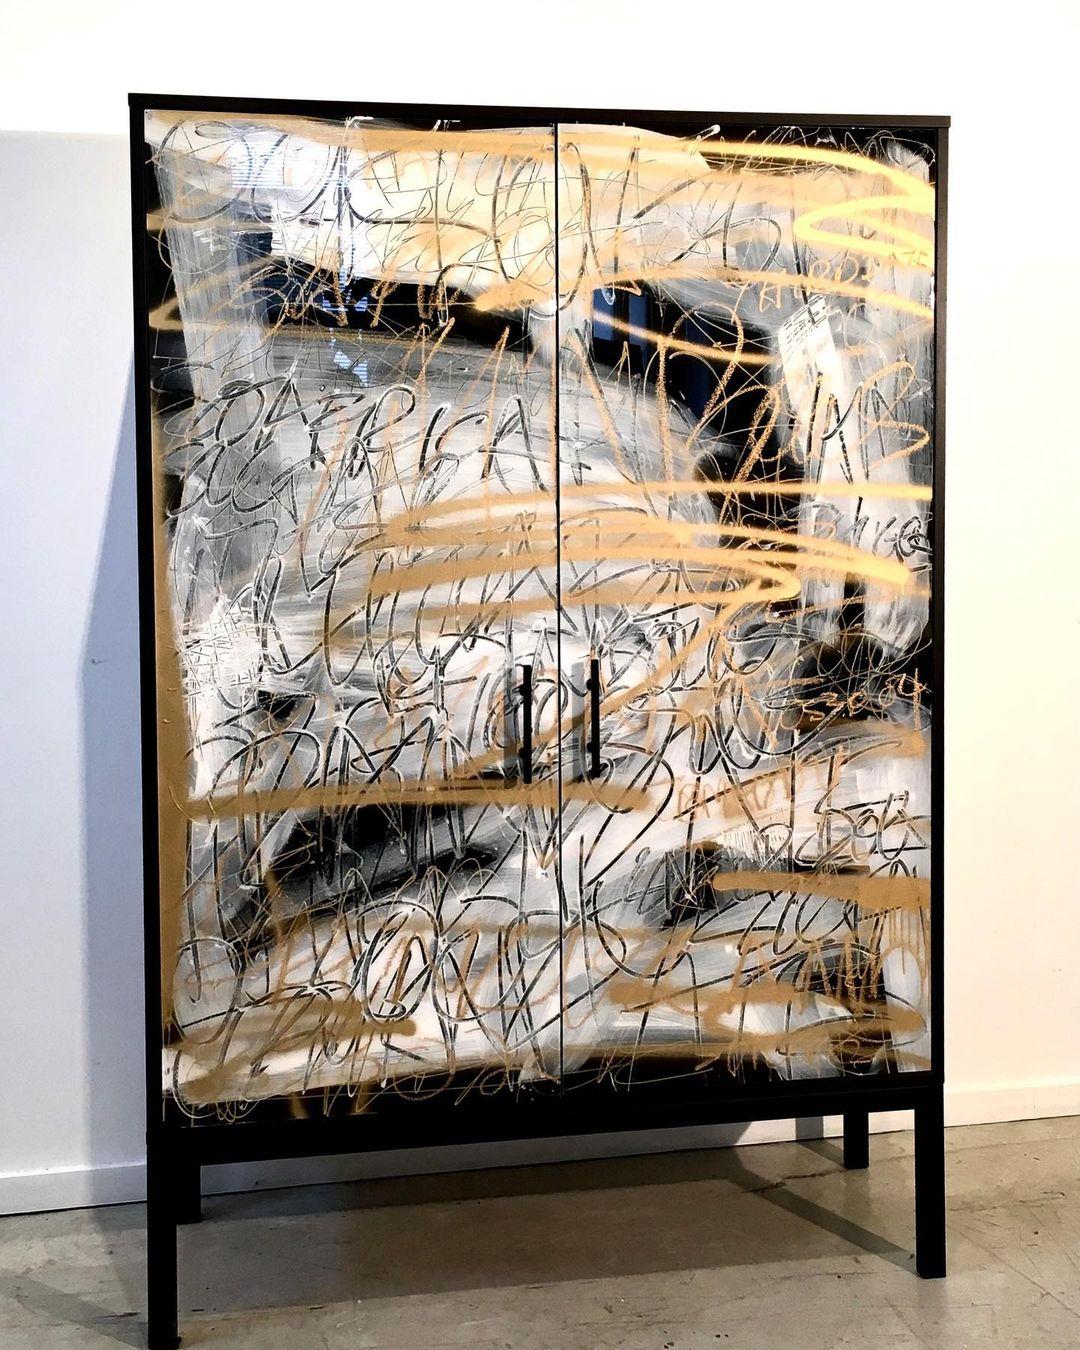 Hudson armoire by Morgan Clay hall
Dimensions: D 45.72 x W 121.92 x H 213.3 cm
Materials: Walnut, Mix medium, Oil paint stick, Spray paint, Resin, Steel
Also Available: Can be customized in Size, finish and color.
The Hudson Armoire is painted by